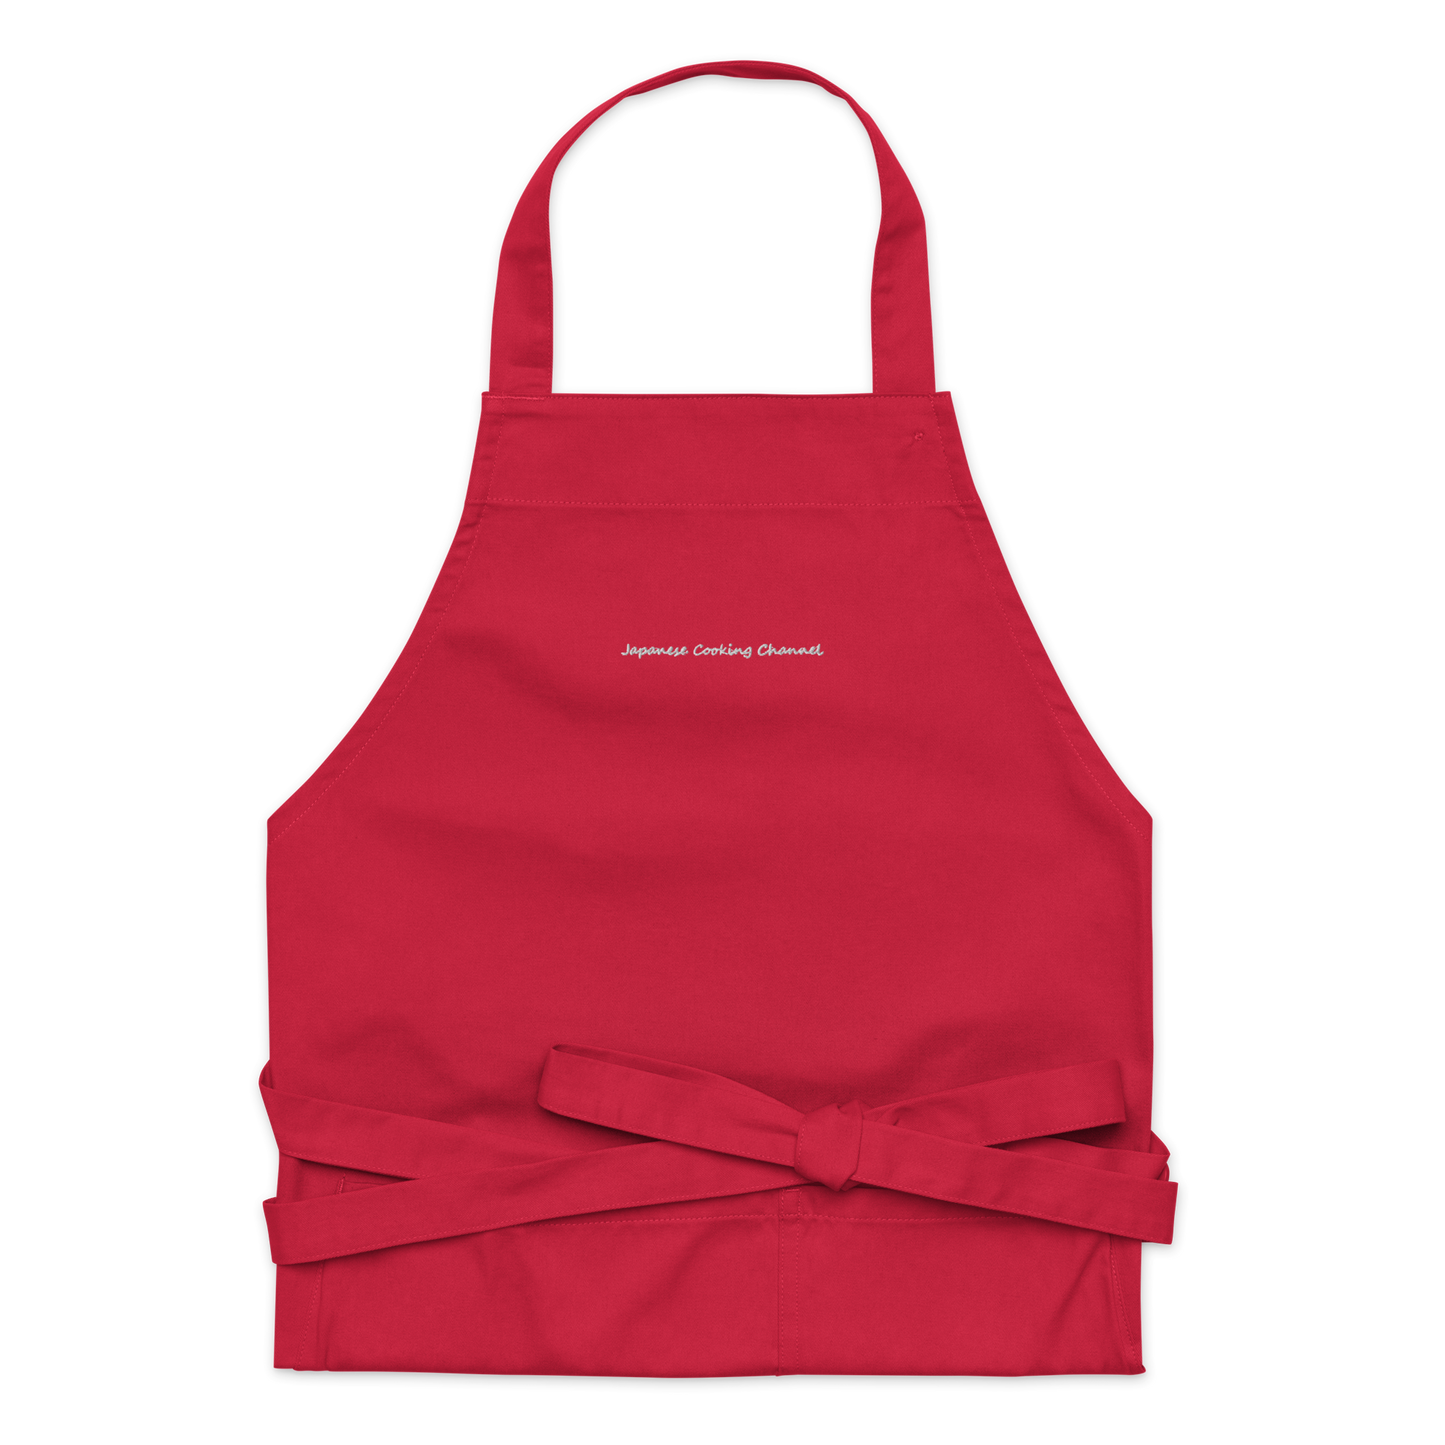 Japanese Cooking Channel organic cotton apron